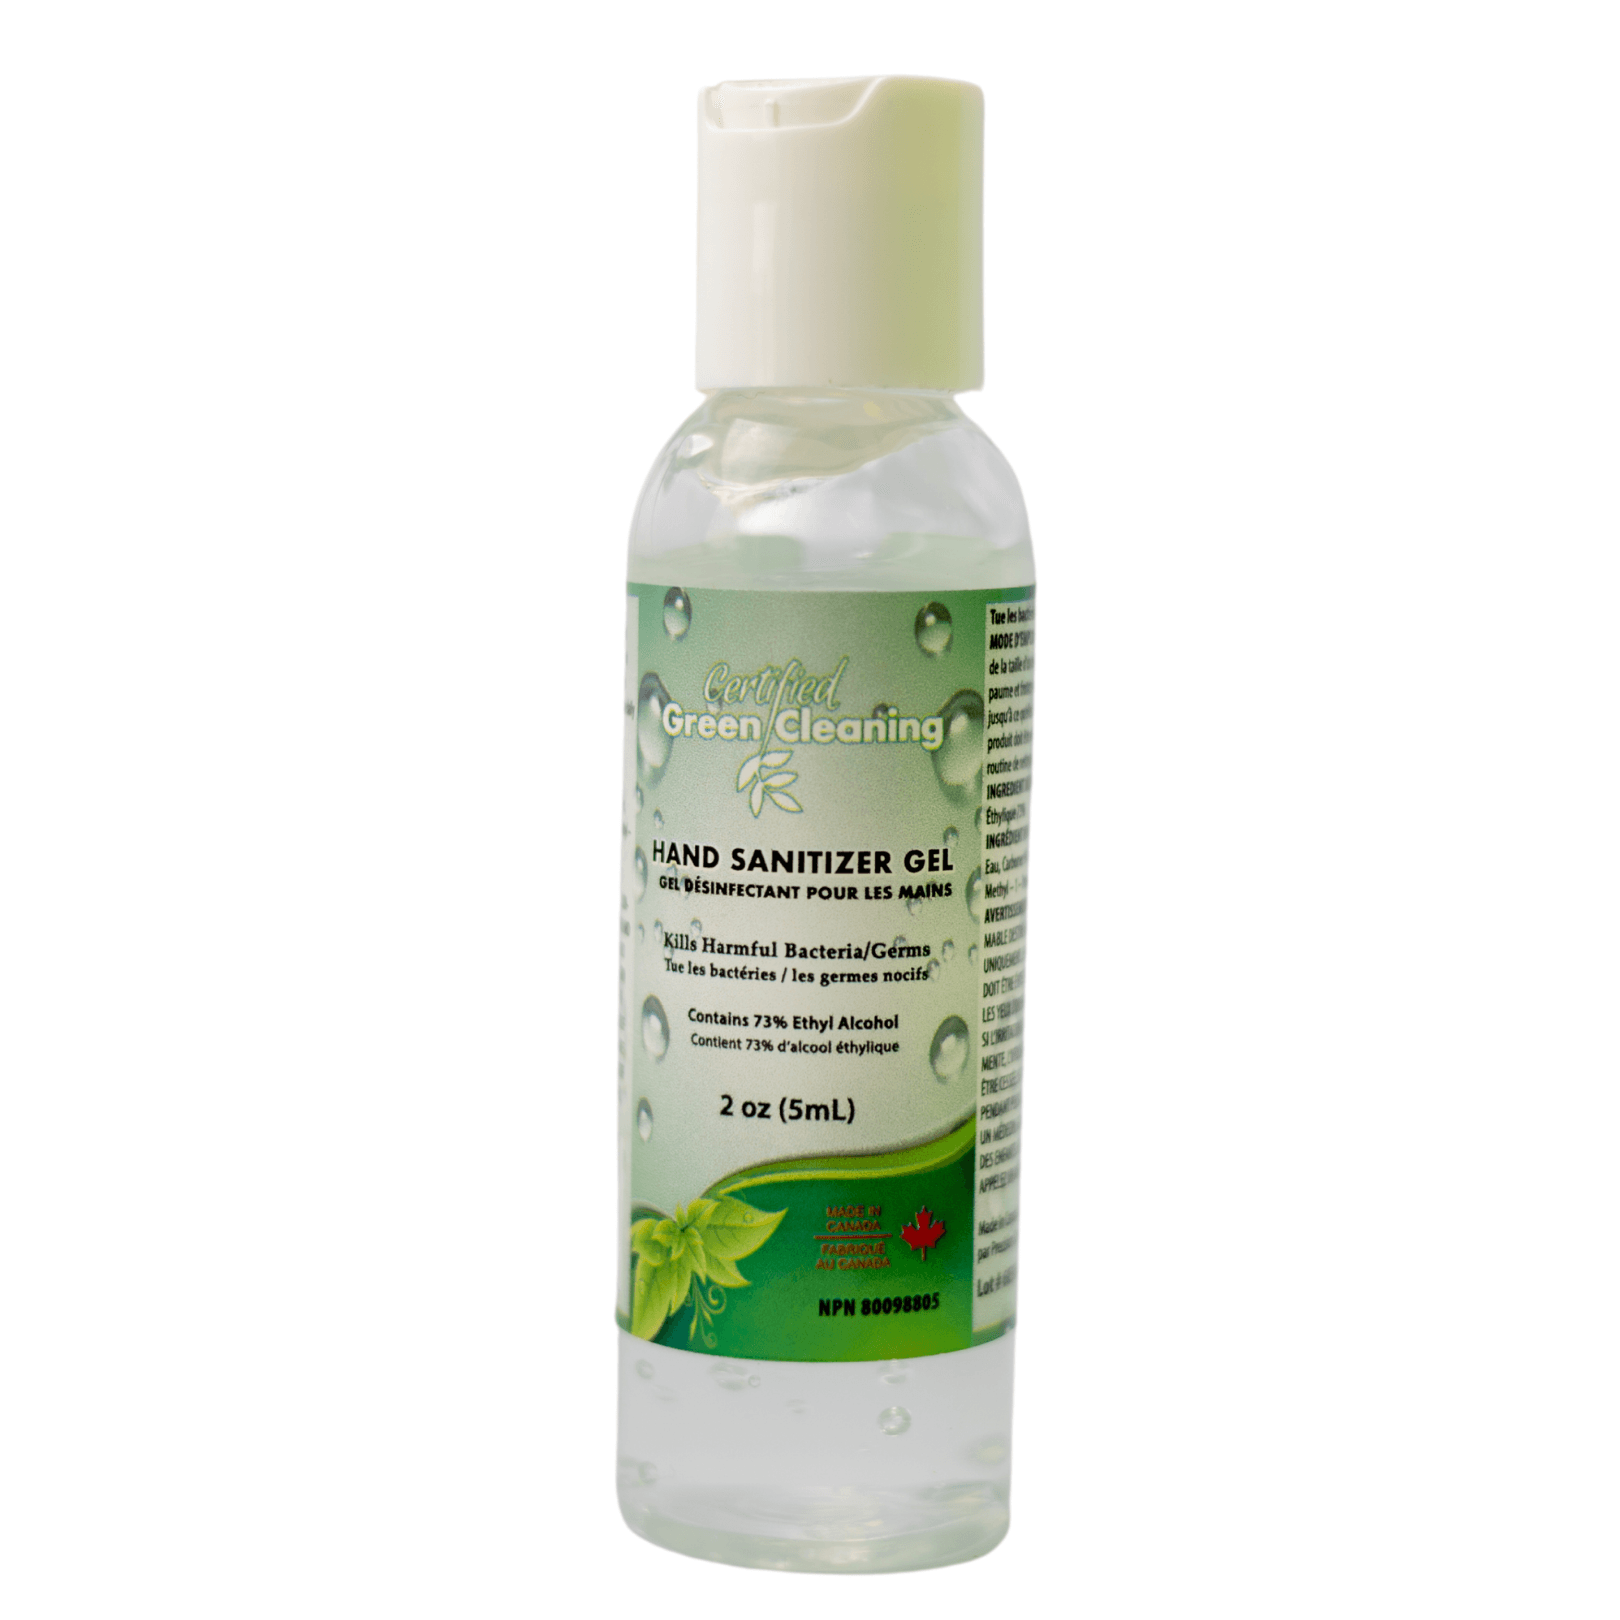 Product CGC Hand Sanitizer 5mL - Certified Green Cleaning image